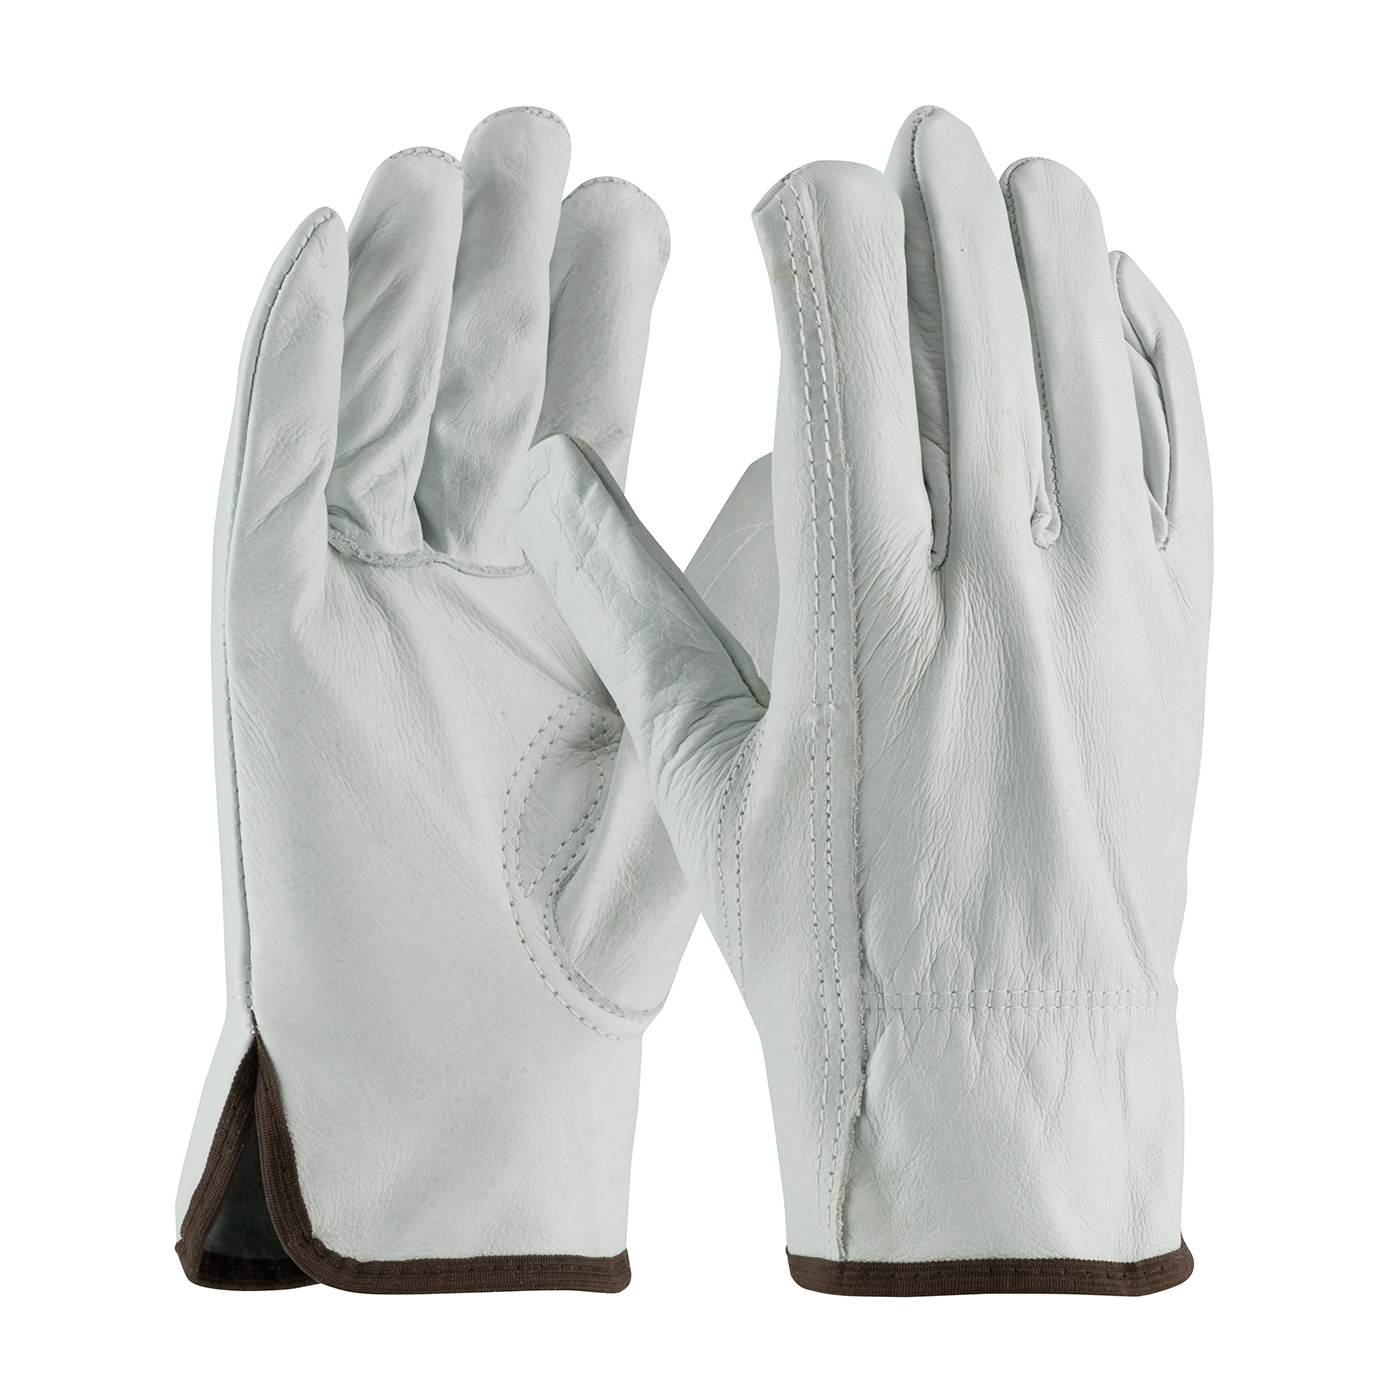 PIP 68-165/S Superior Grade Top Grain Cowhide Leather Drivers Glove - Keystone Thumb - Small PID-68 165 S